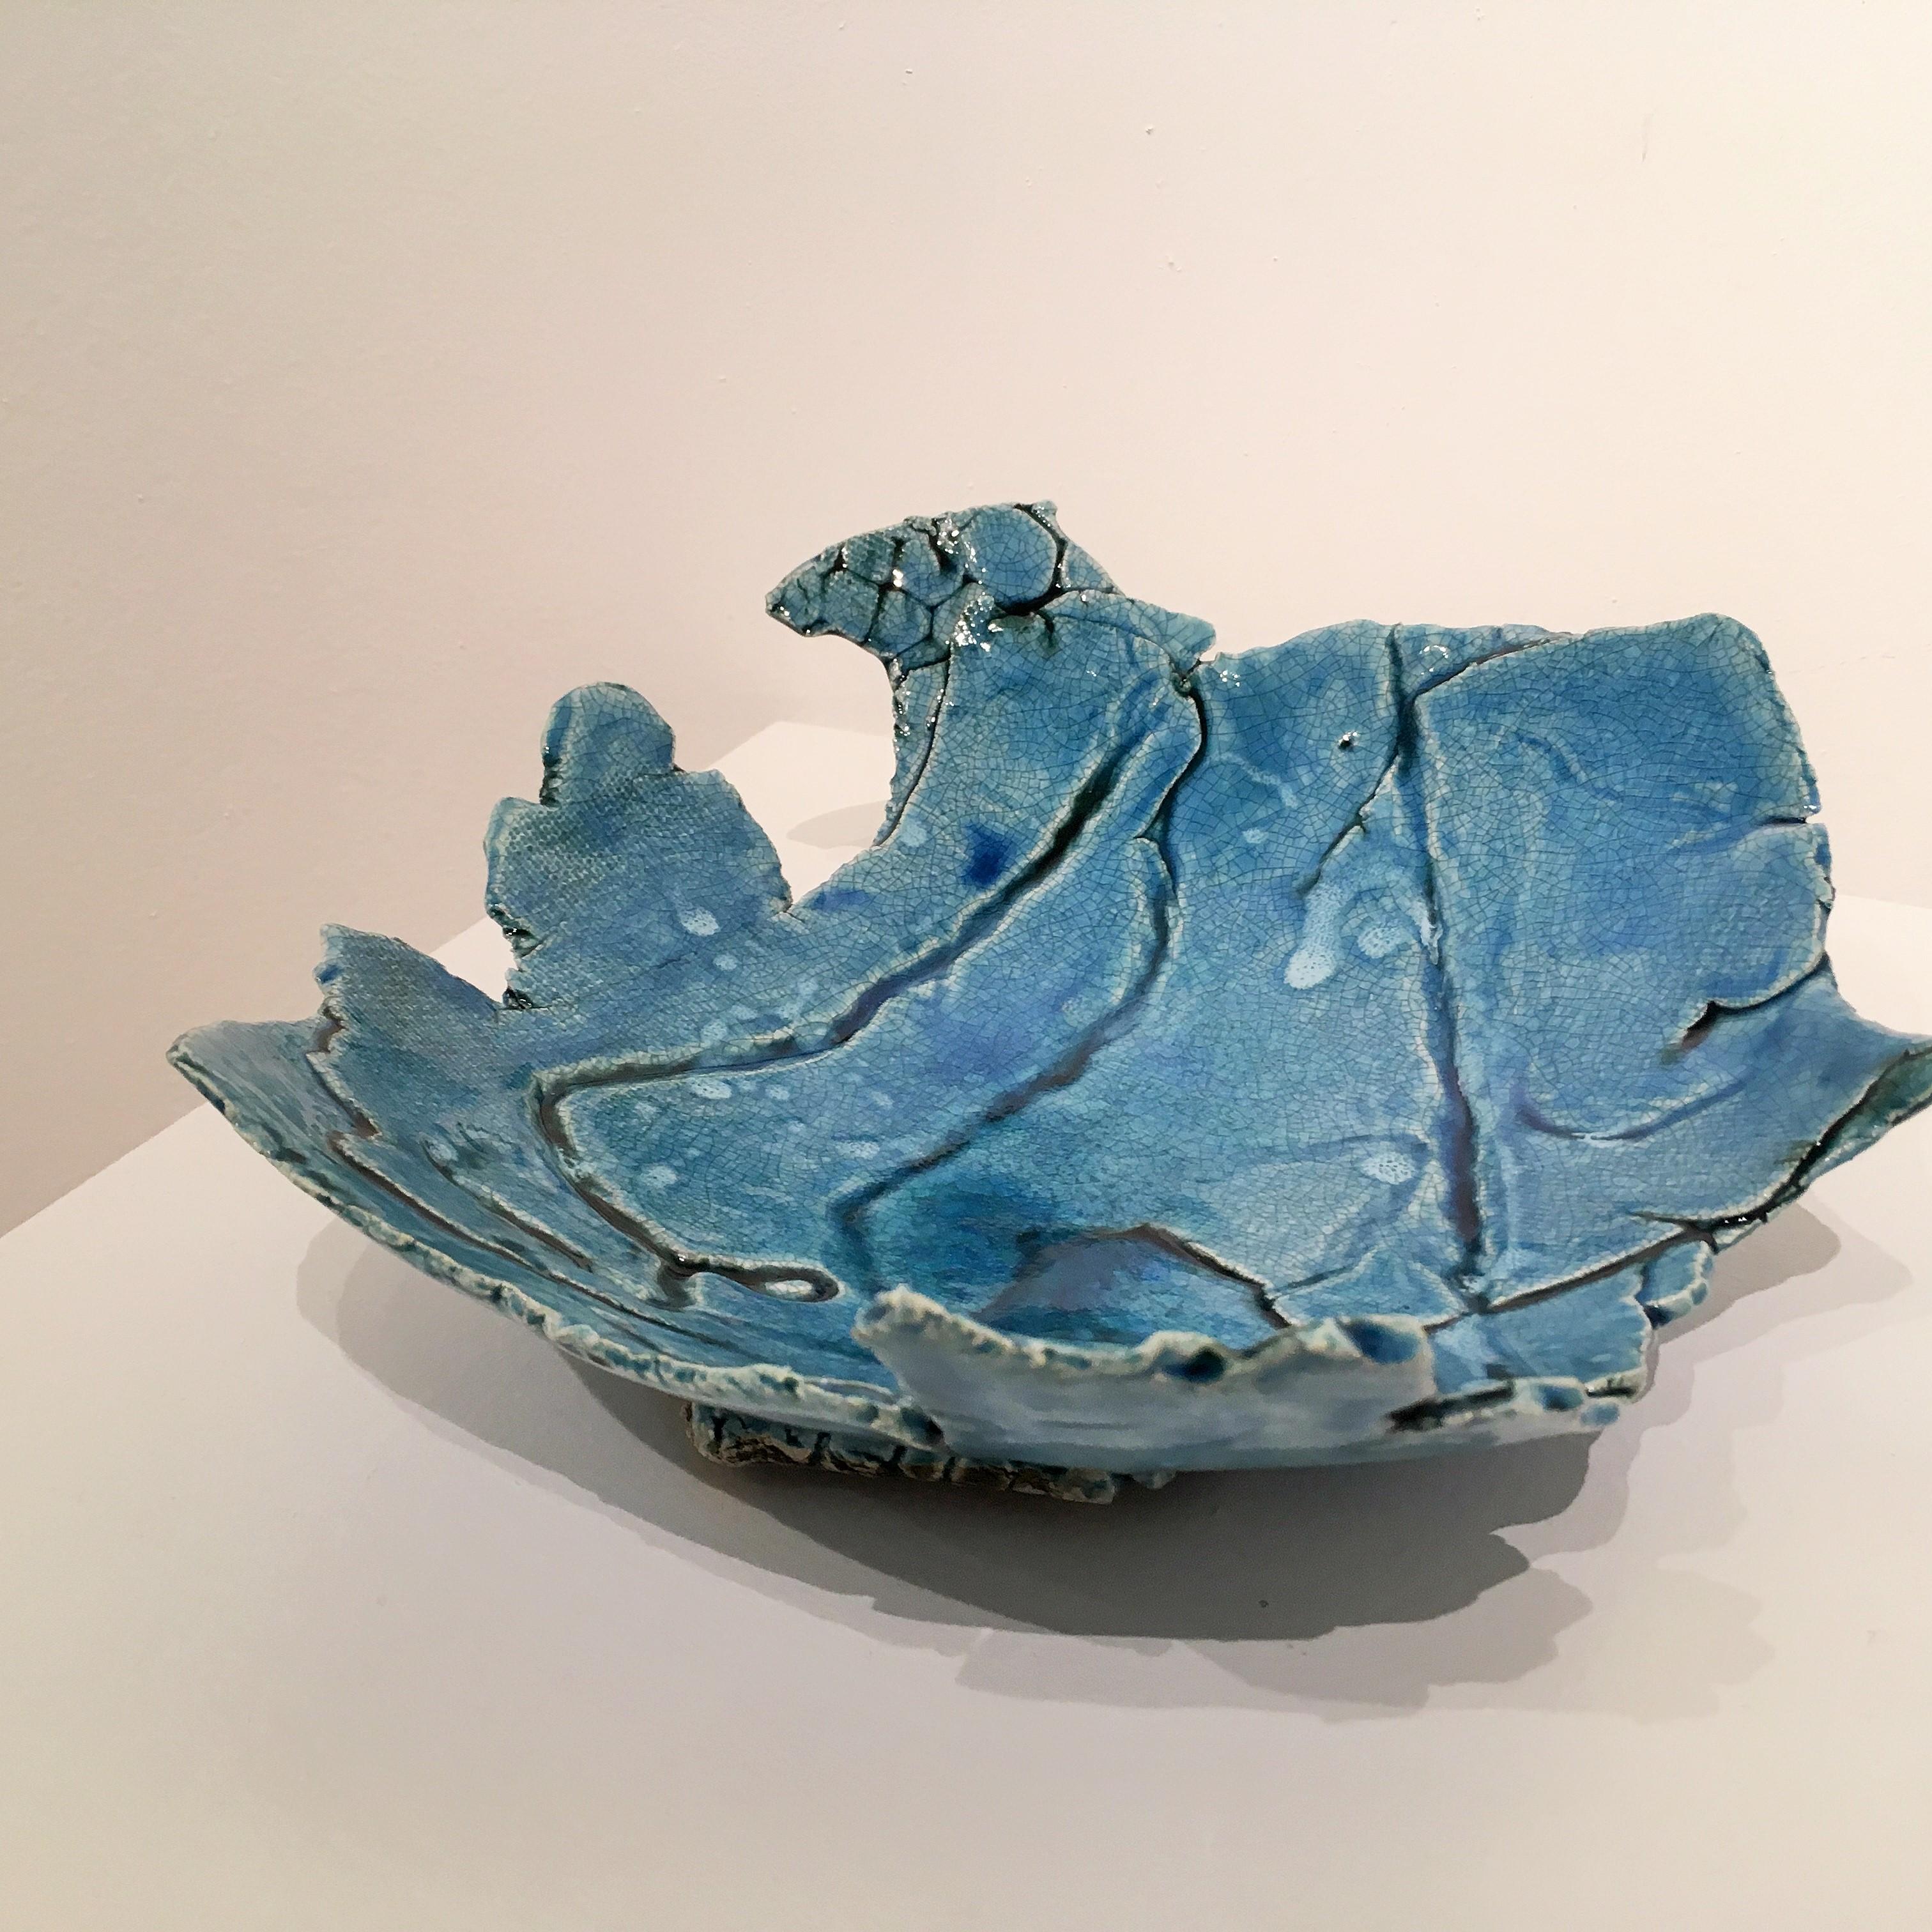 Contemporary ceramic bowl by Stacey H. Hammond. Bowl is sea foam in color, composed of overlapping ceramic elements. It is oval shape, with height of 3.00